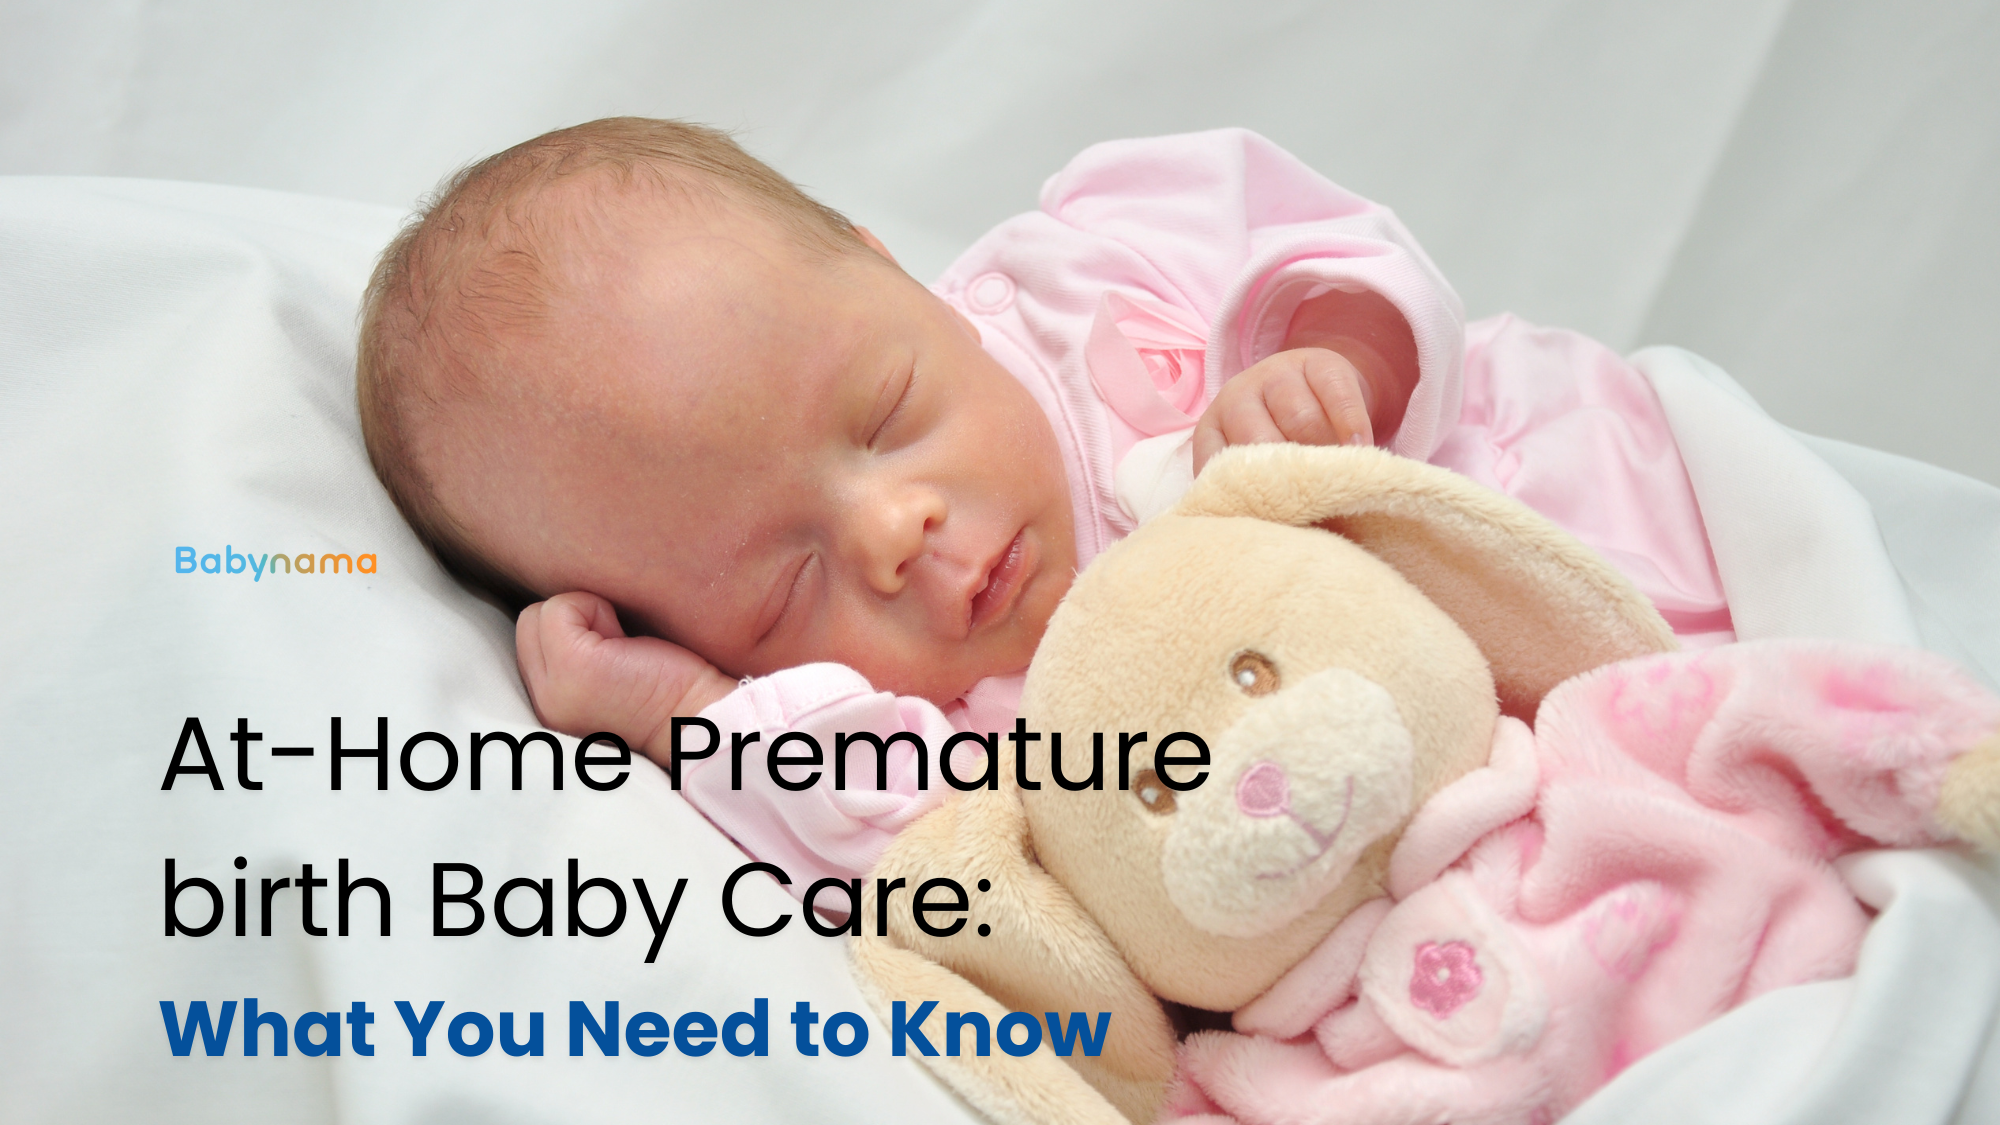 At-Home Premature birth Baby Care: What You Need to Know